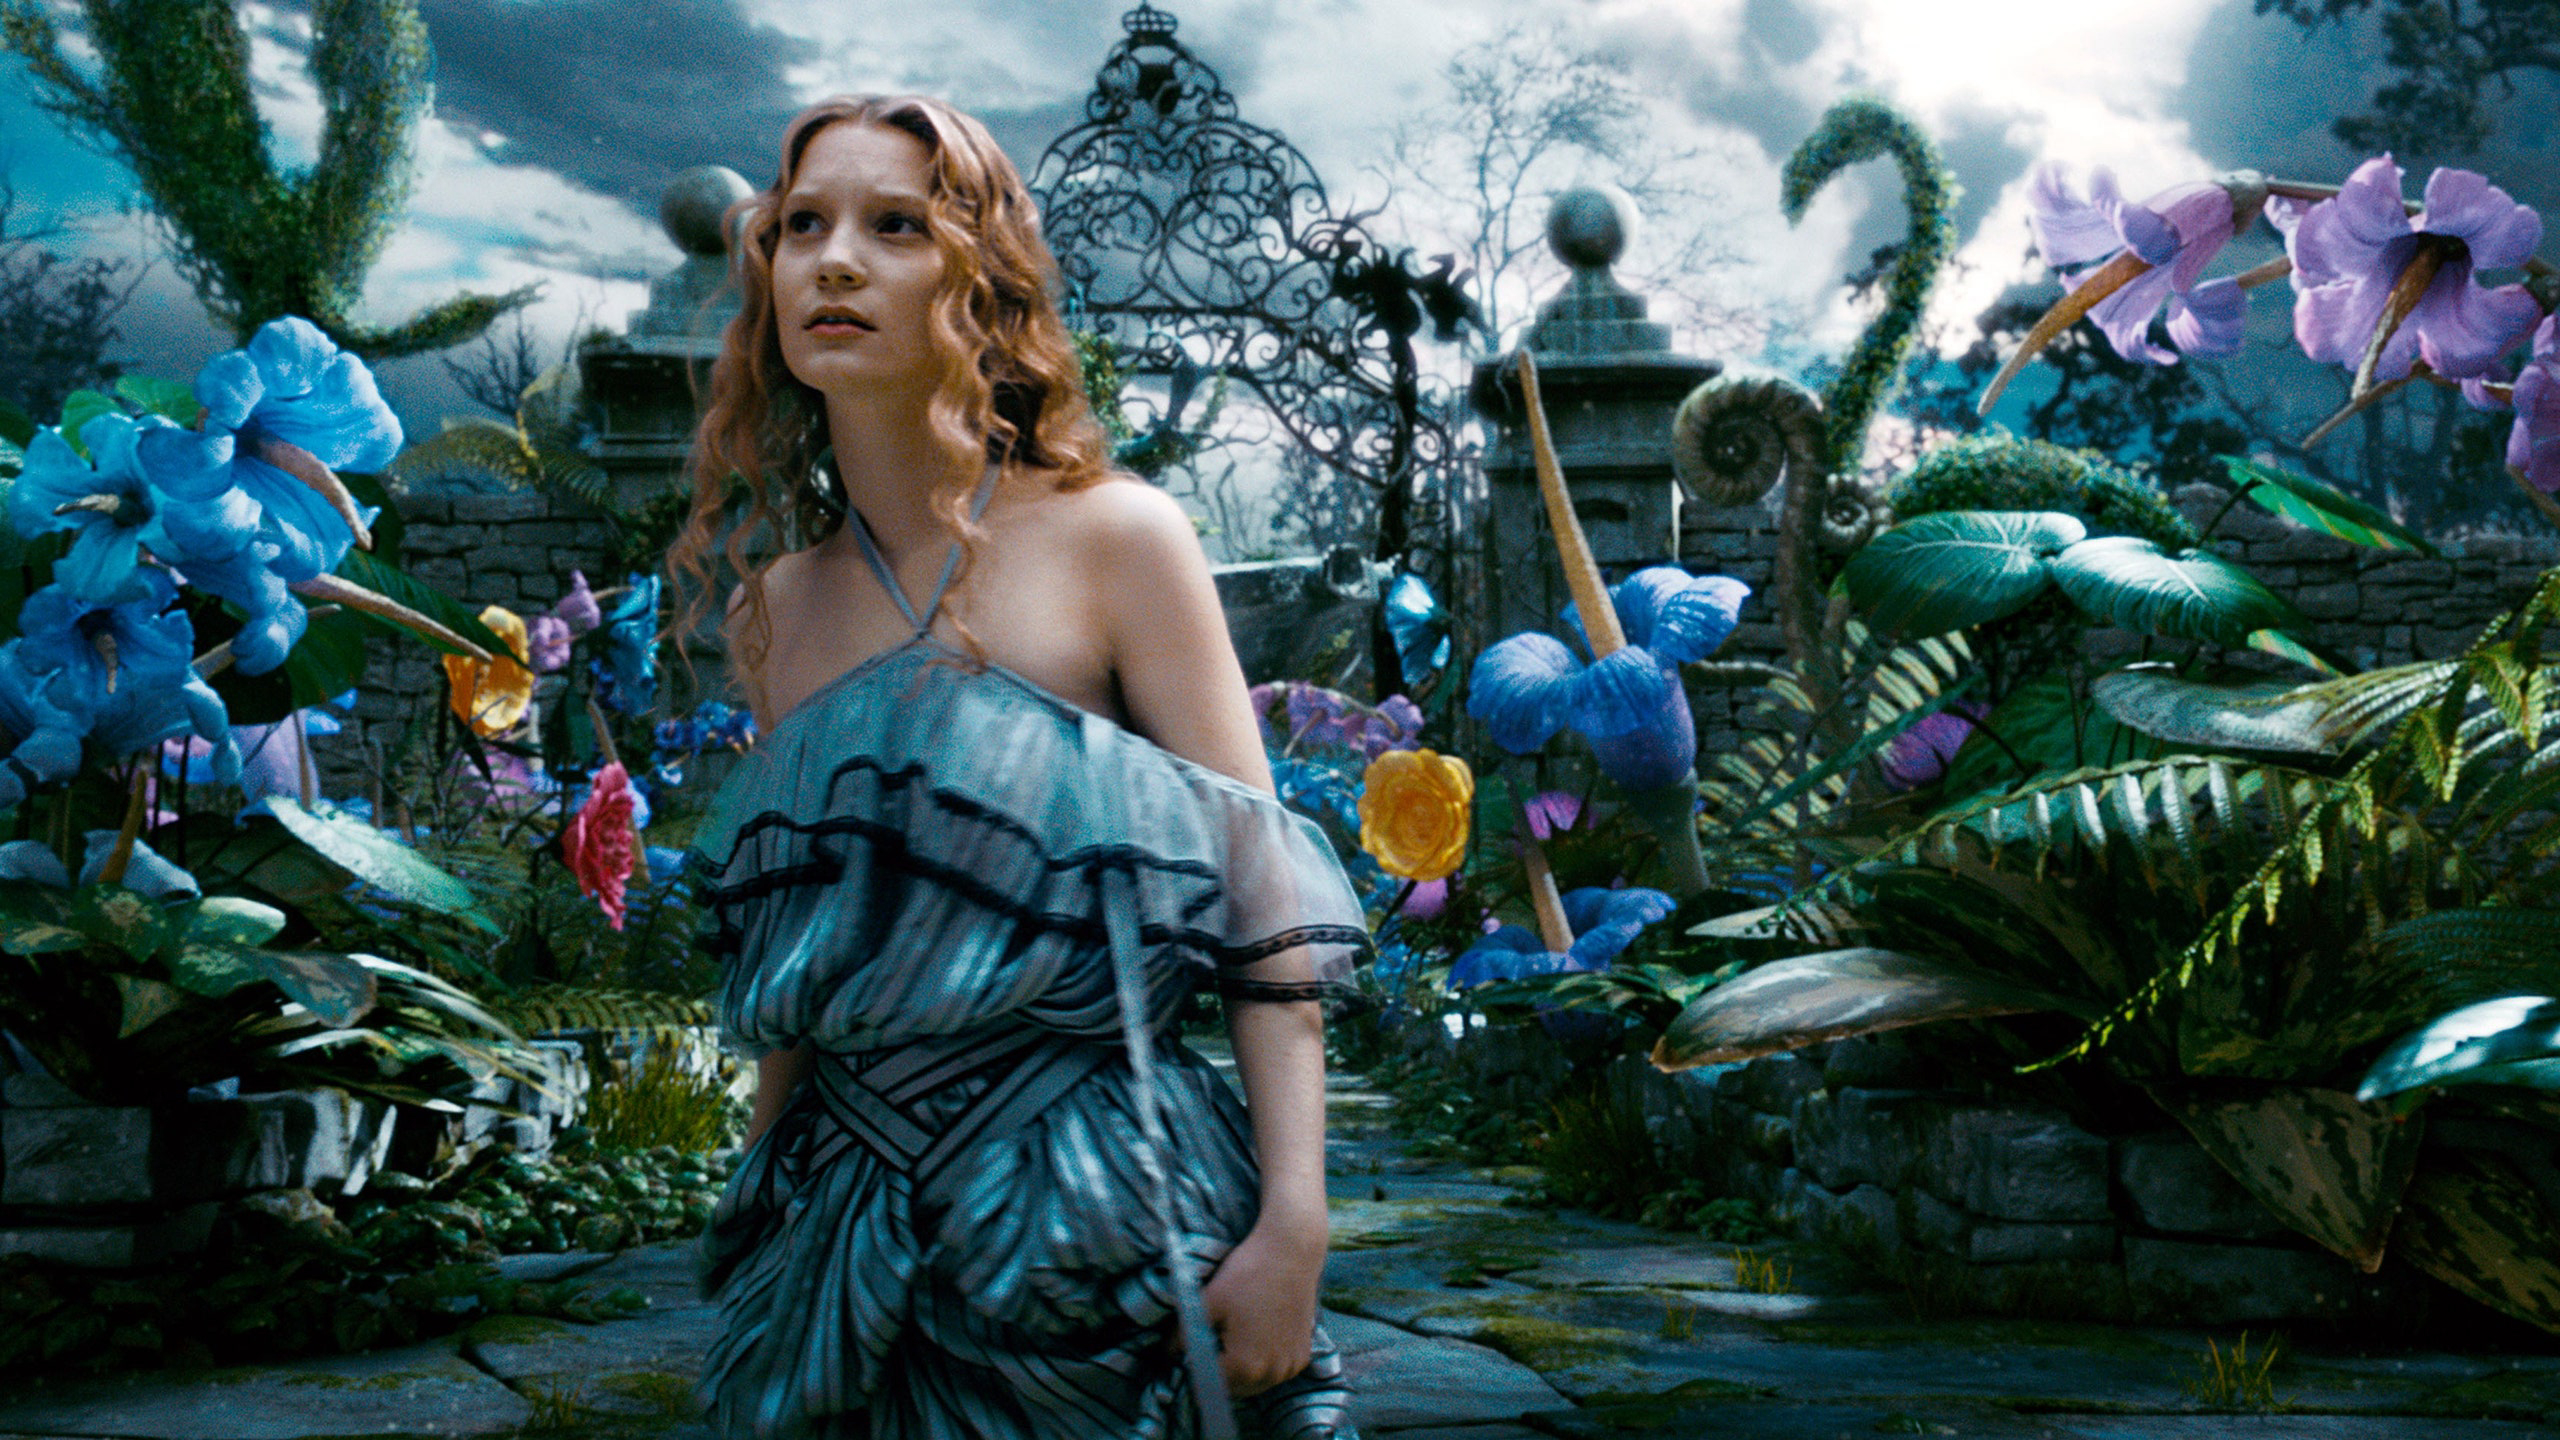 Alice in Wonderland: Through the Looking Glass / Alice in Wonderland: Through the Looking Glass (2016)